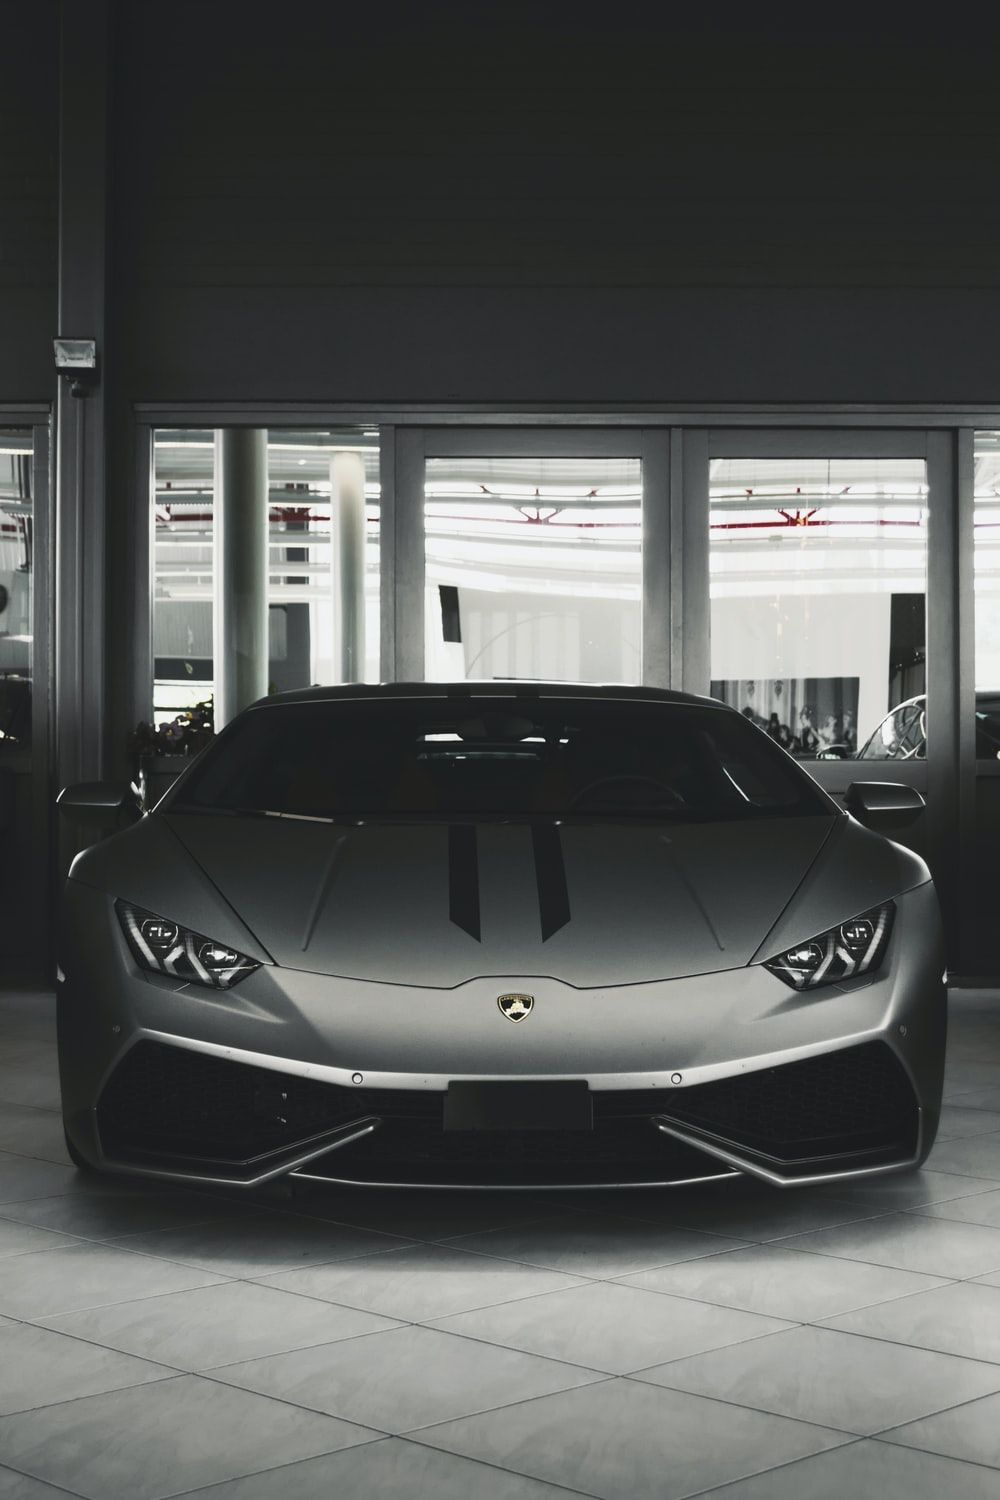 Luxury Car Picture [HD]. Download Free Image